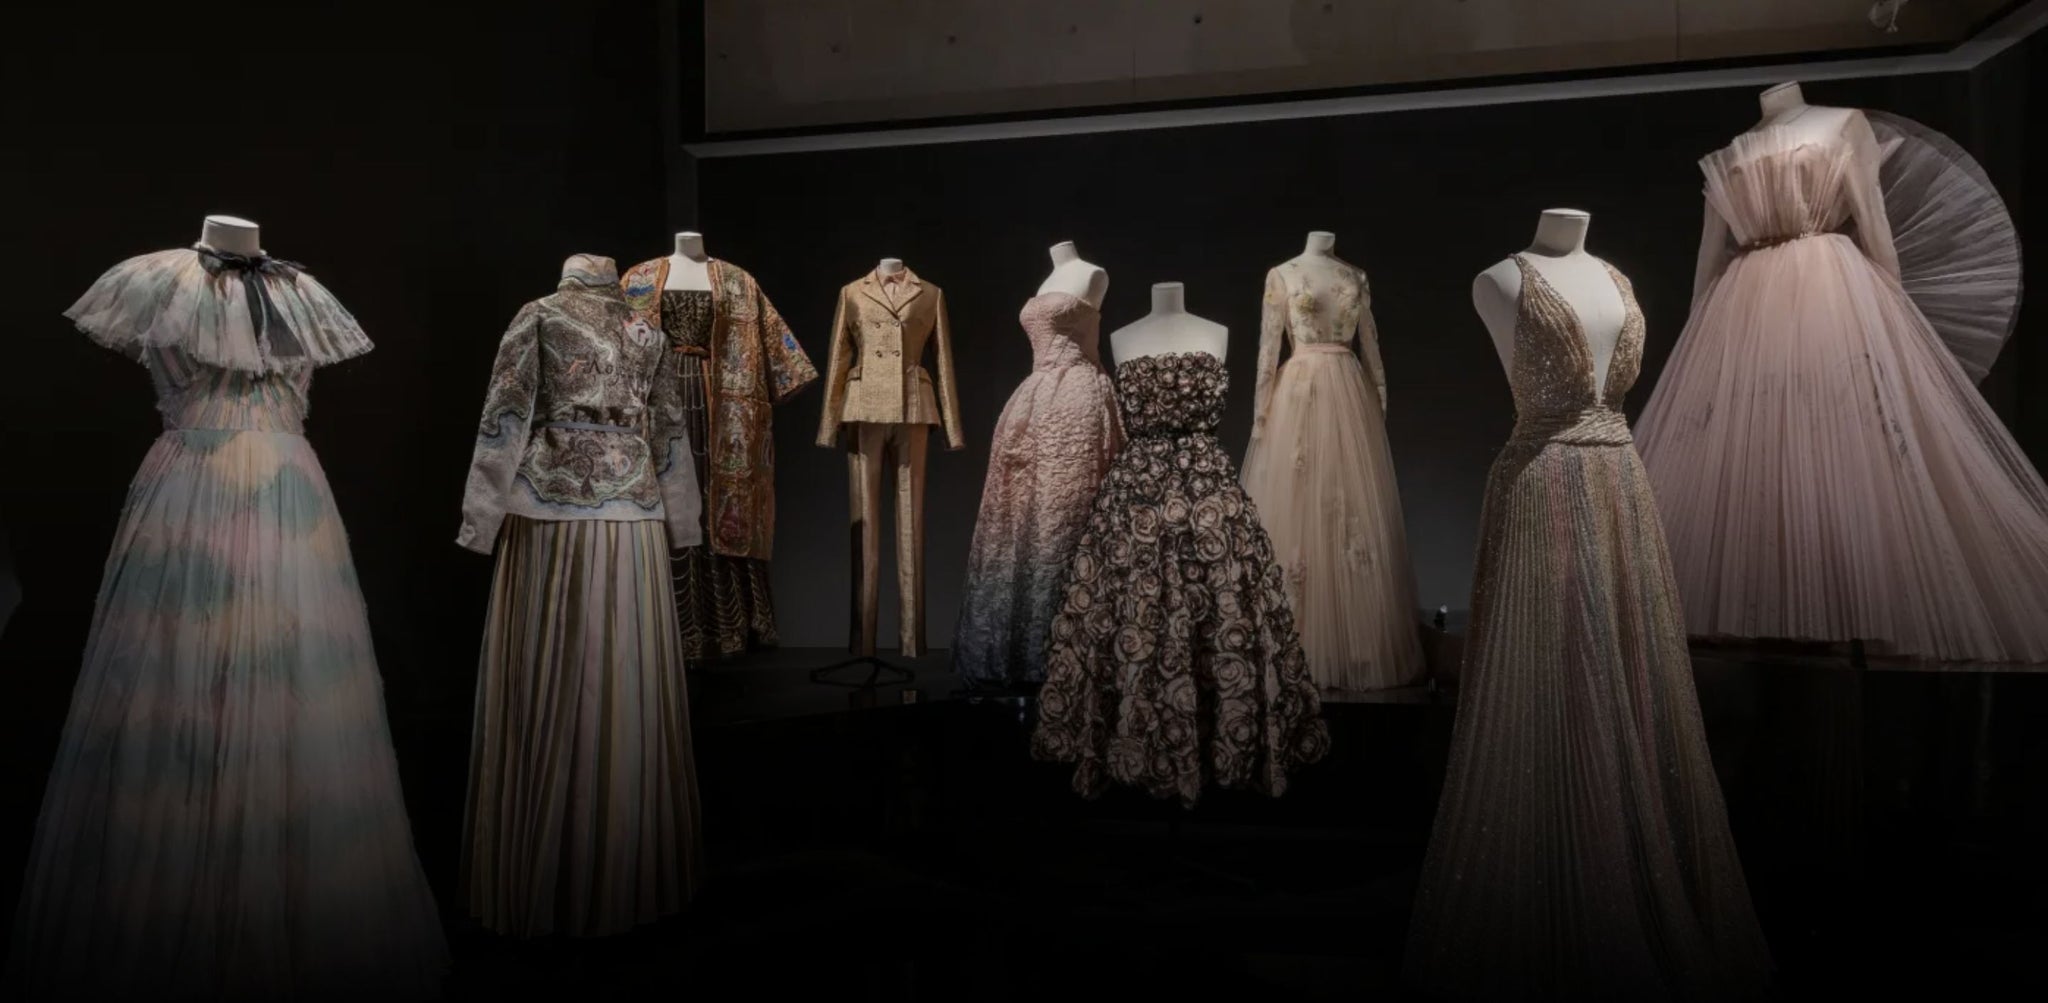 The History of the Christian Dior Fashion House - Arte & Lusso